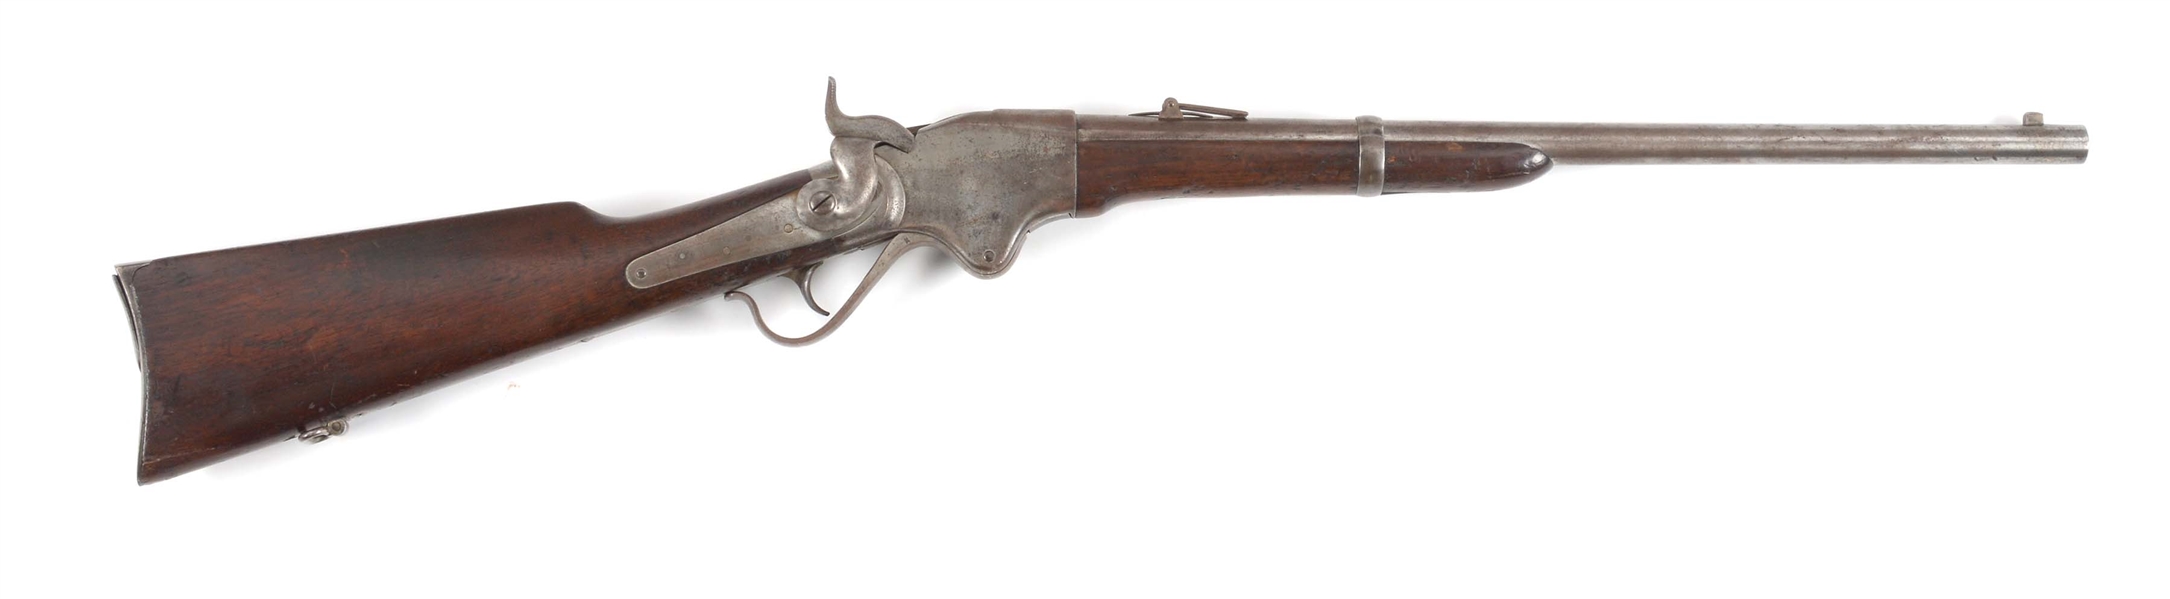 (A) SPENCER REPEATING LEVER ACTION CARBINE.